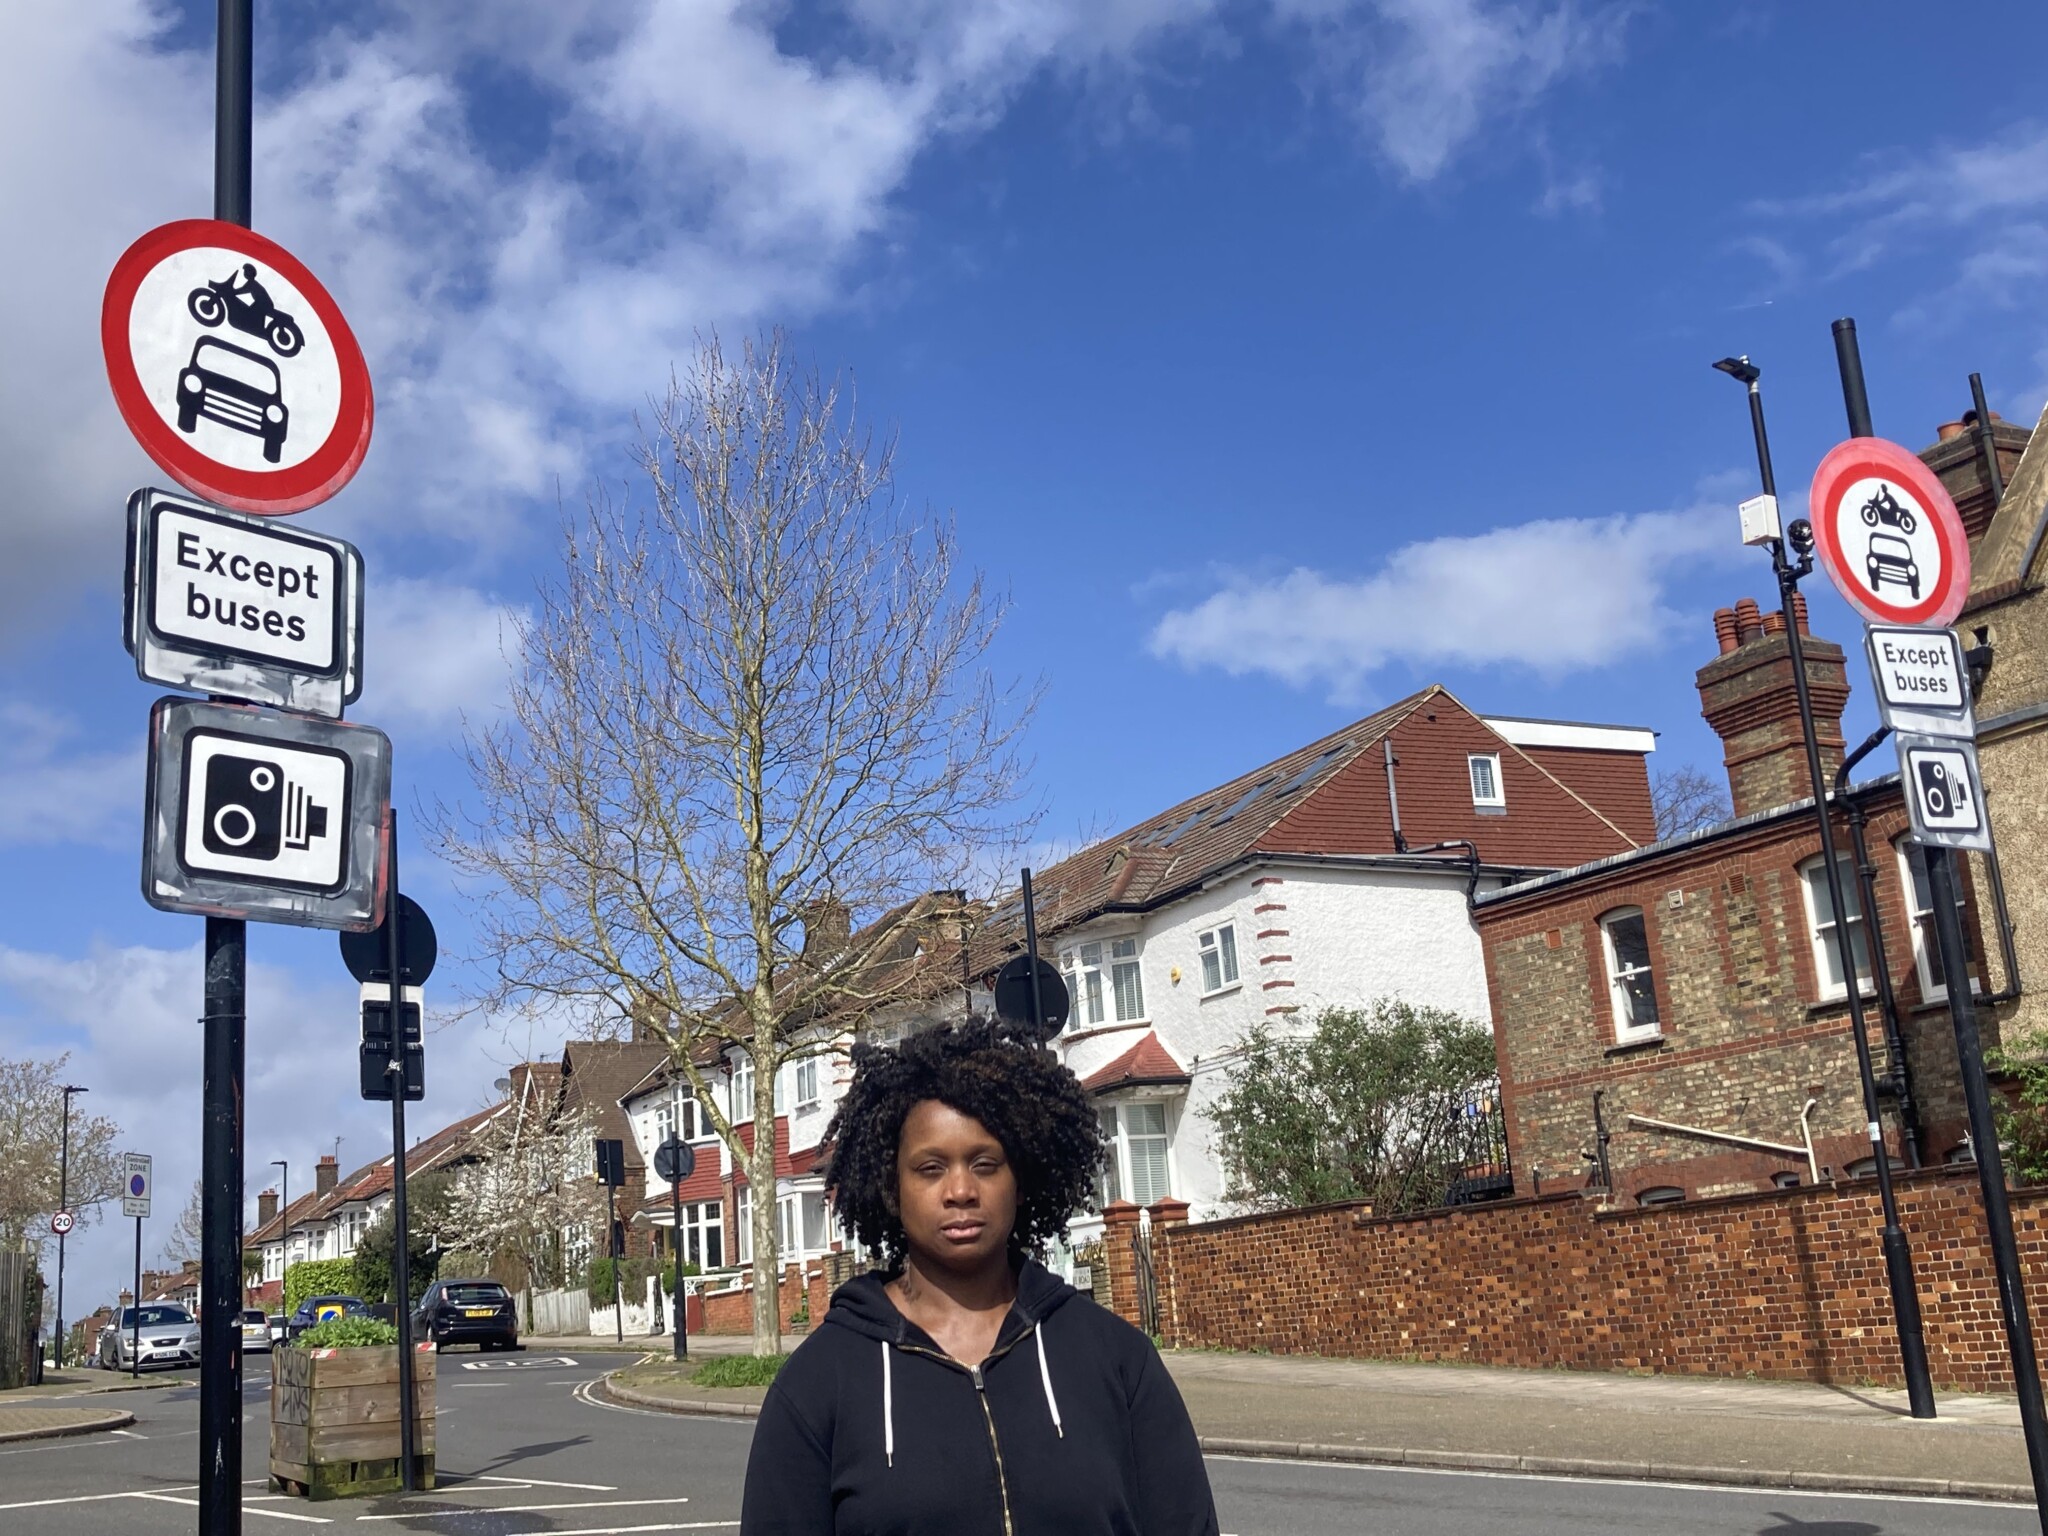 The driving fines keep coming for Streatham couple who should be exempt - South London News